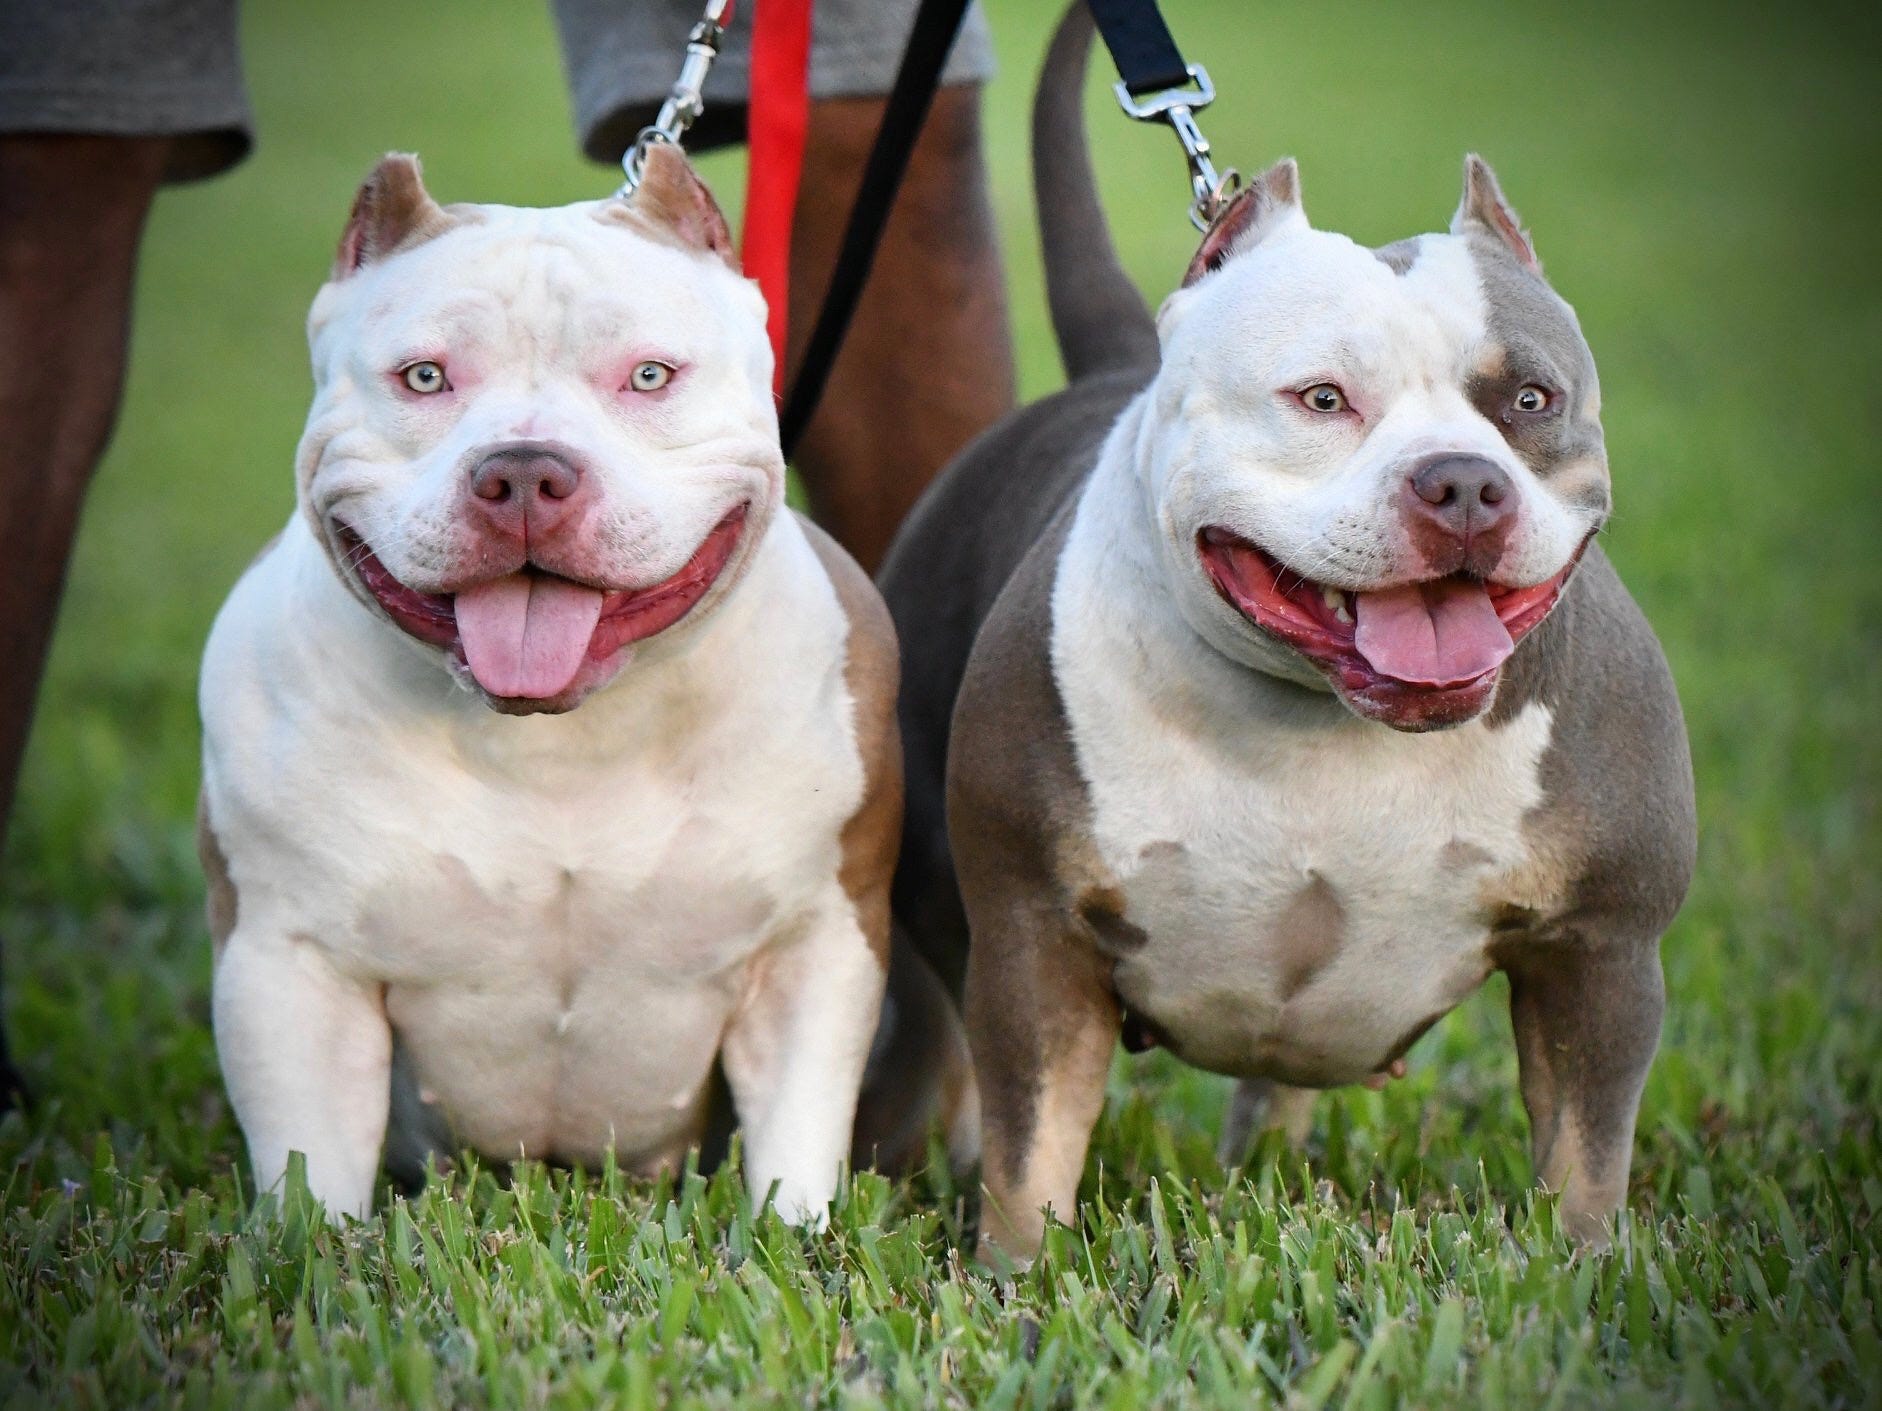 facts about american bully